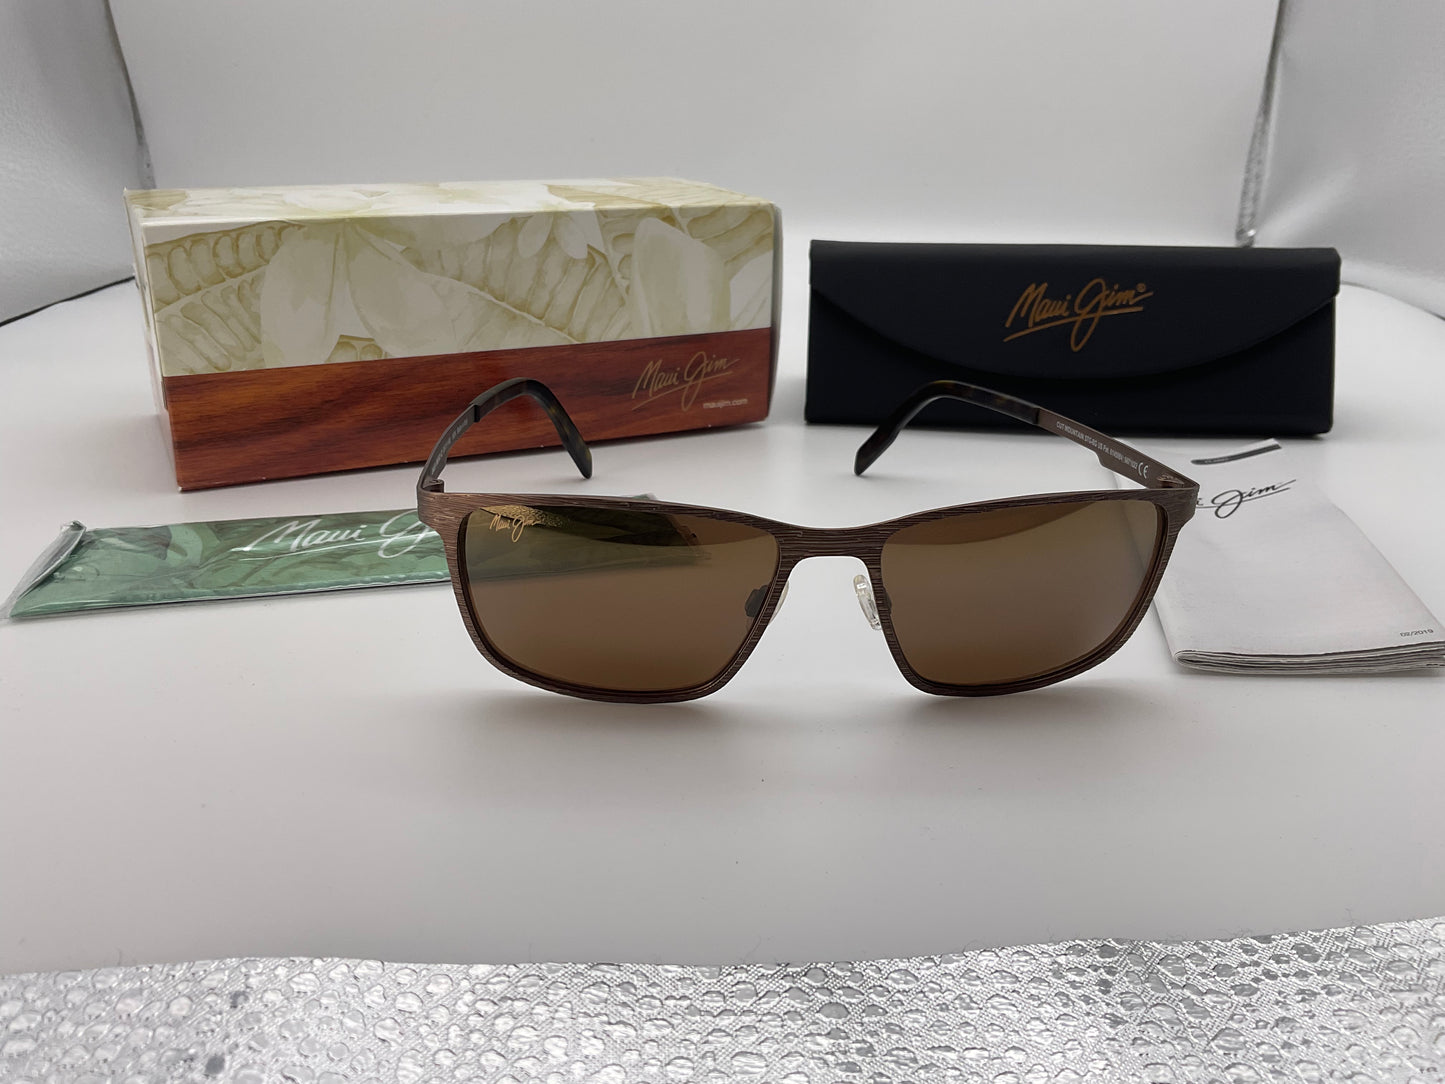 MAUI JIM CUT MOUNTAIN Etched Brown/HCL Bronze Polarized Sunglasses H532-22 NEW